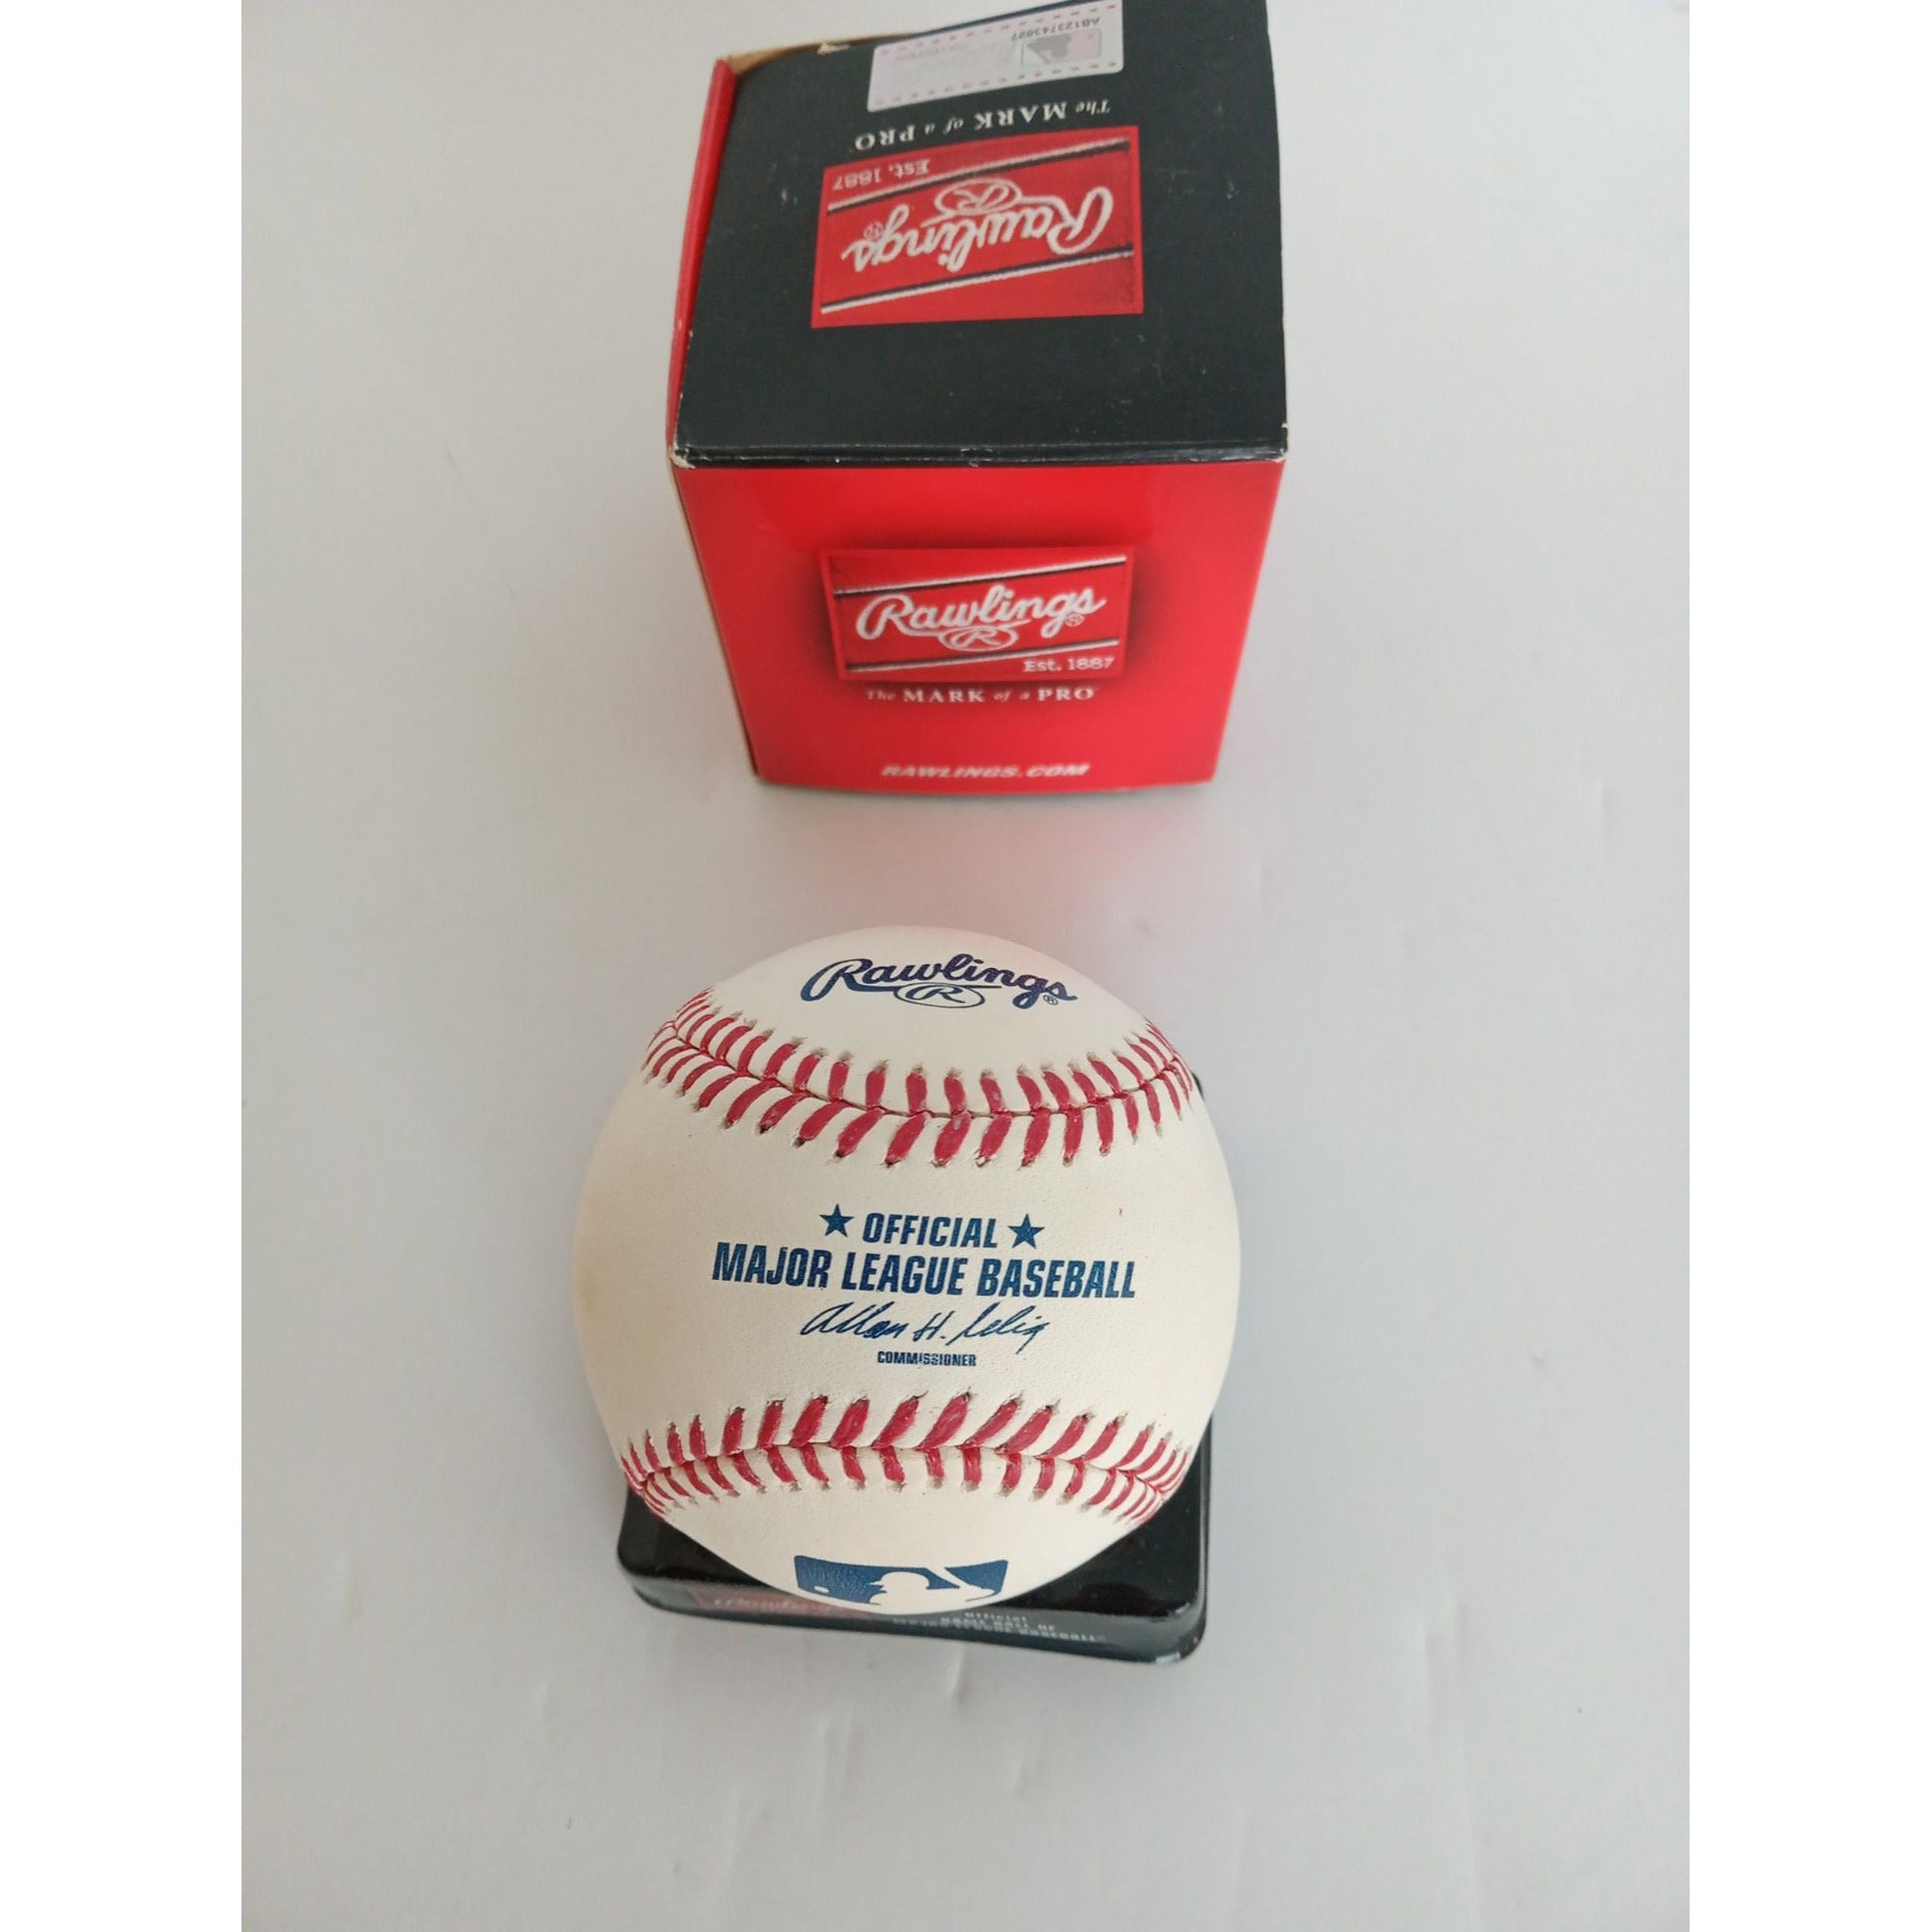 George Steinbrenner New York Yankees MLB baseball signed with proof